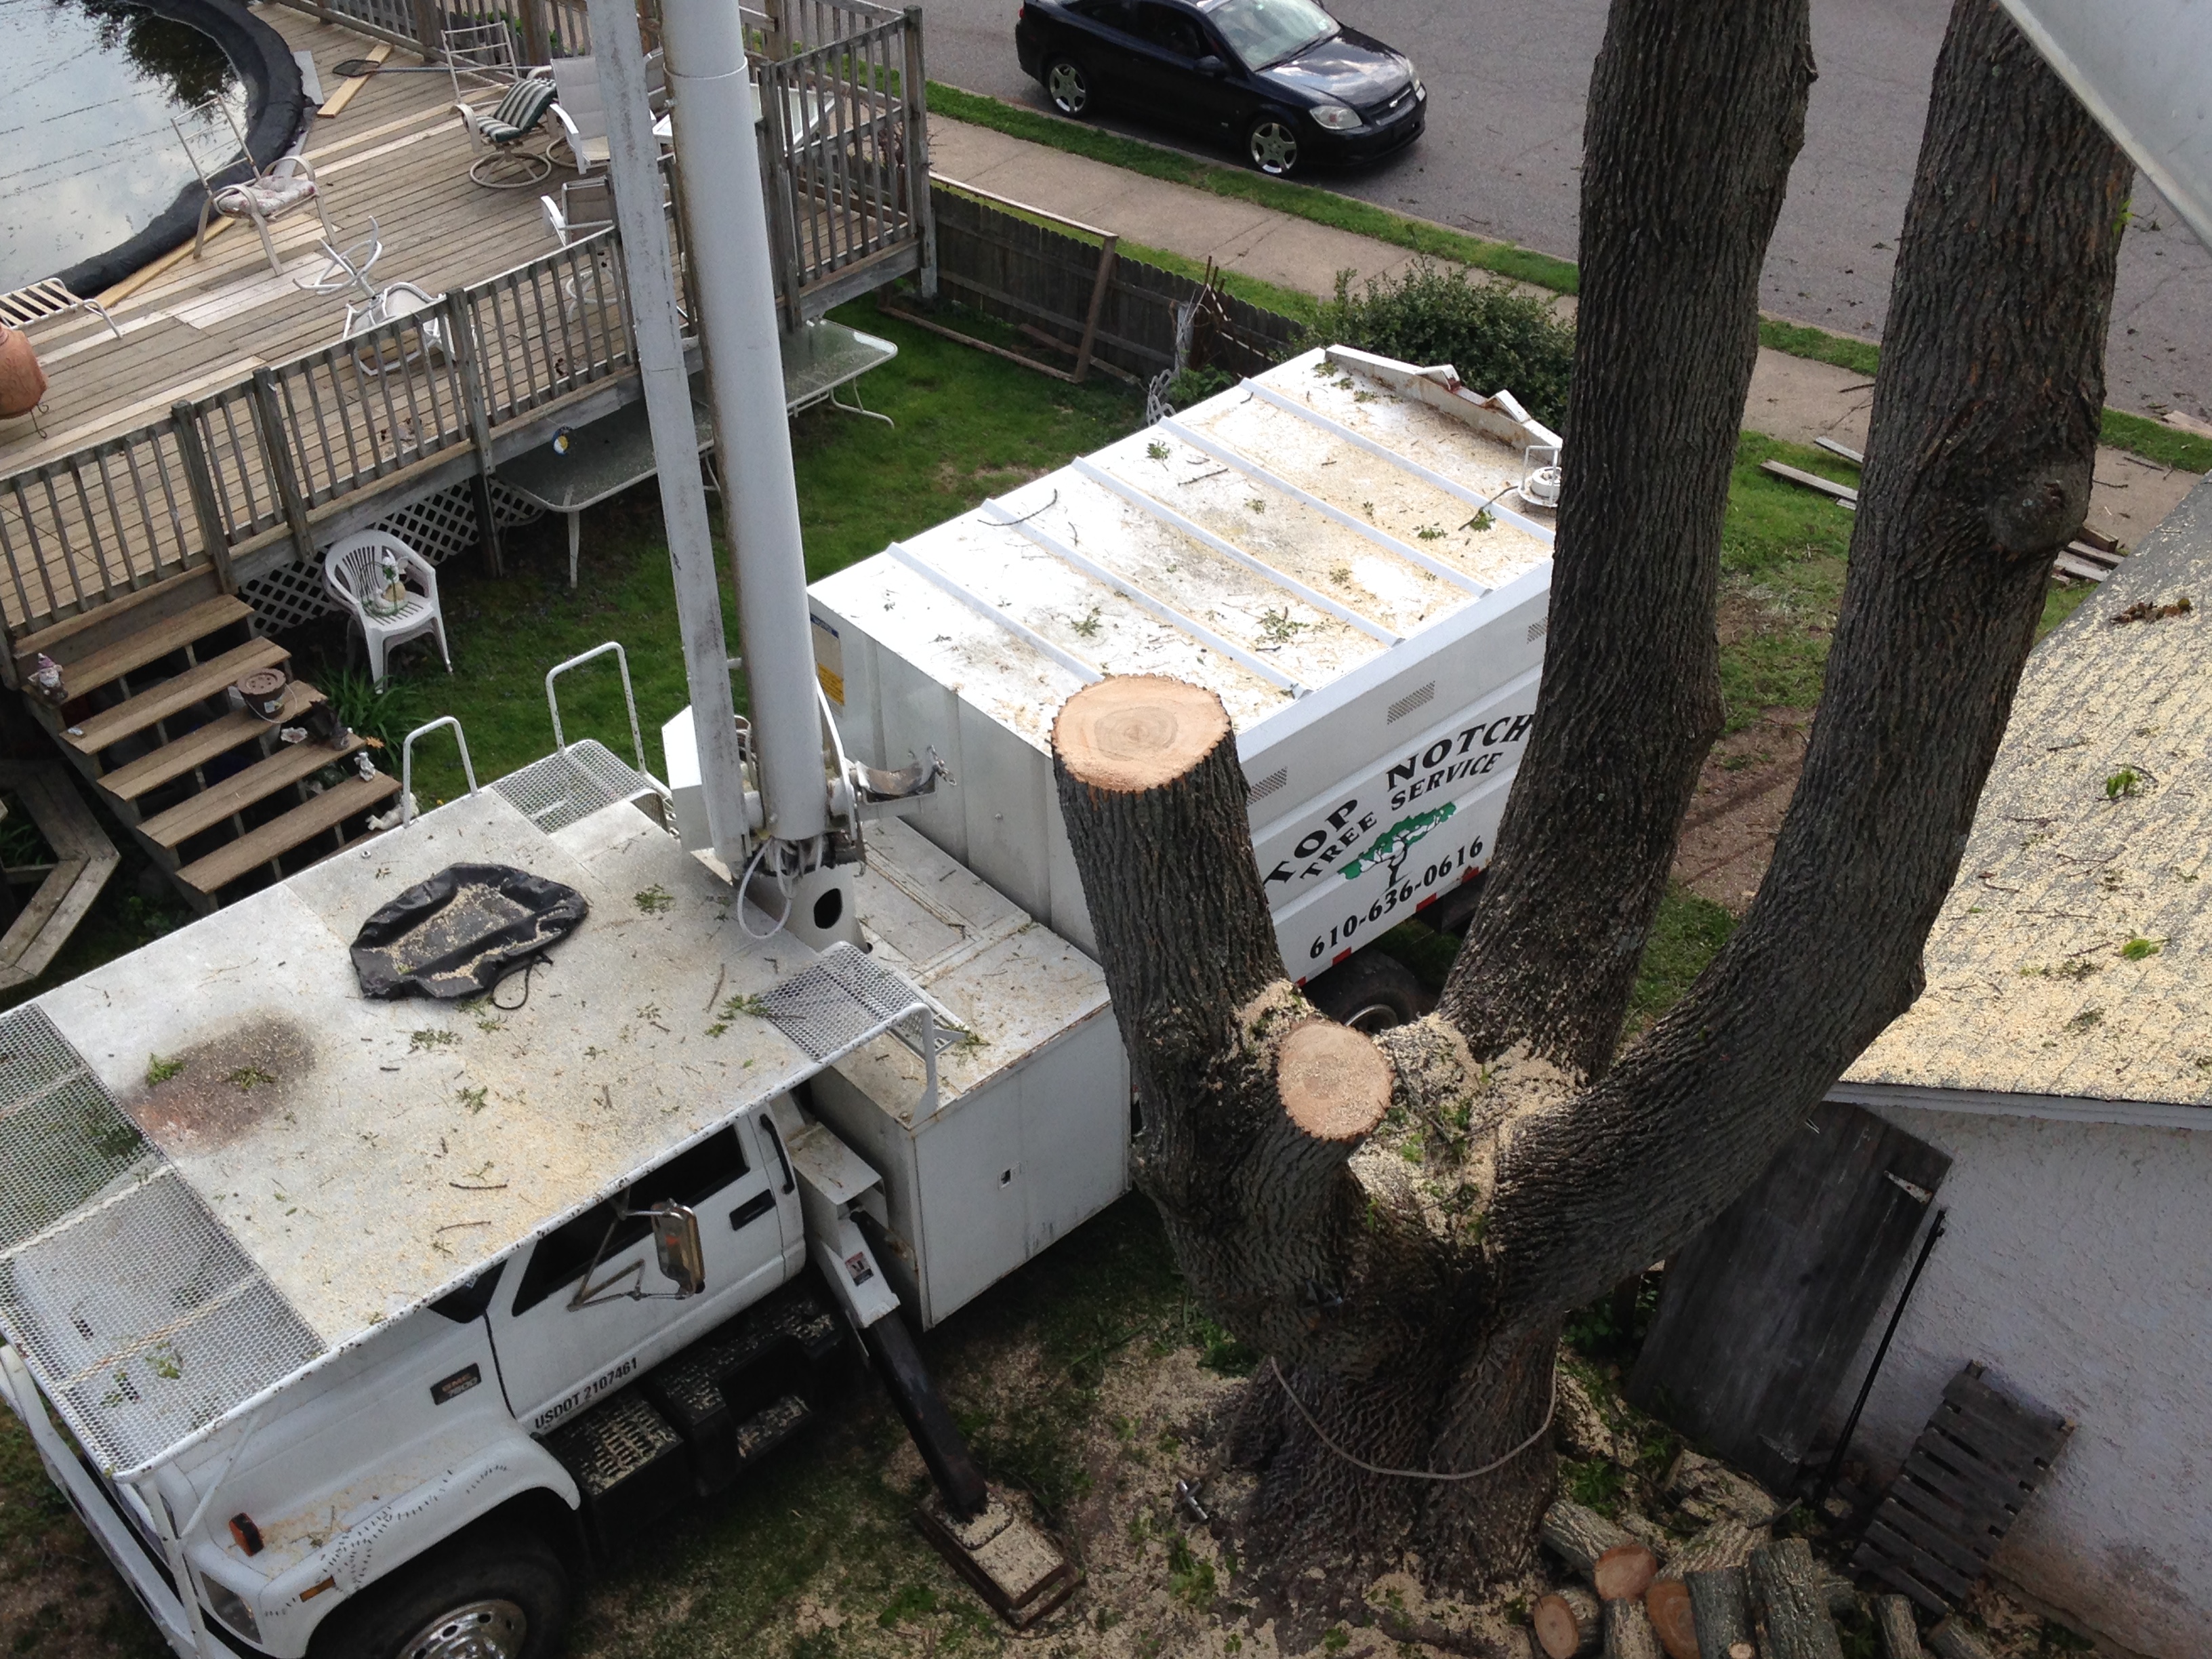  Tree Removal Services